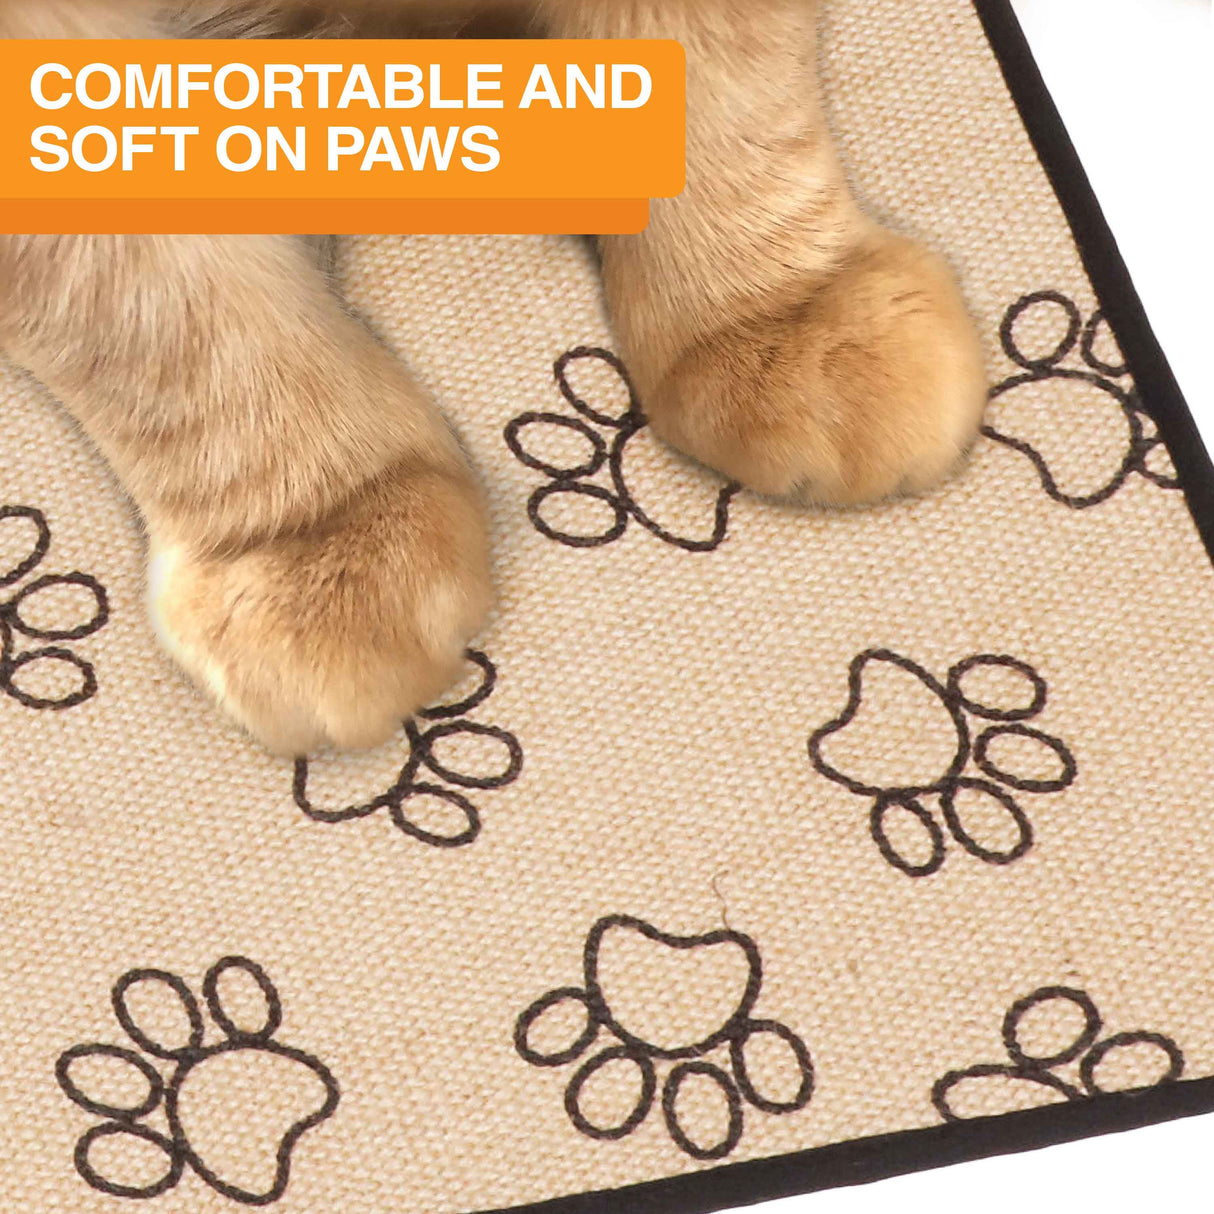 Paw print mat is comfortable on cat's paws